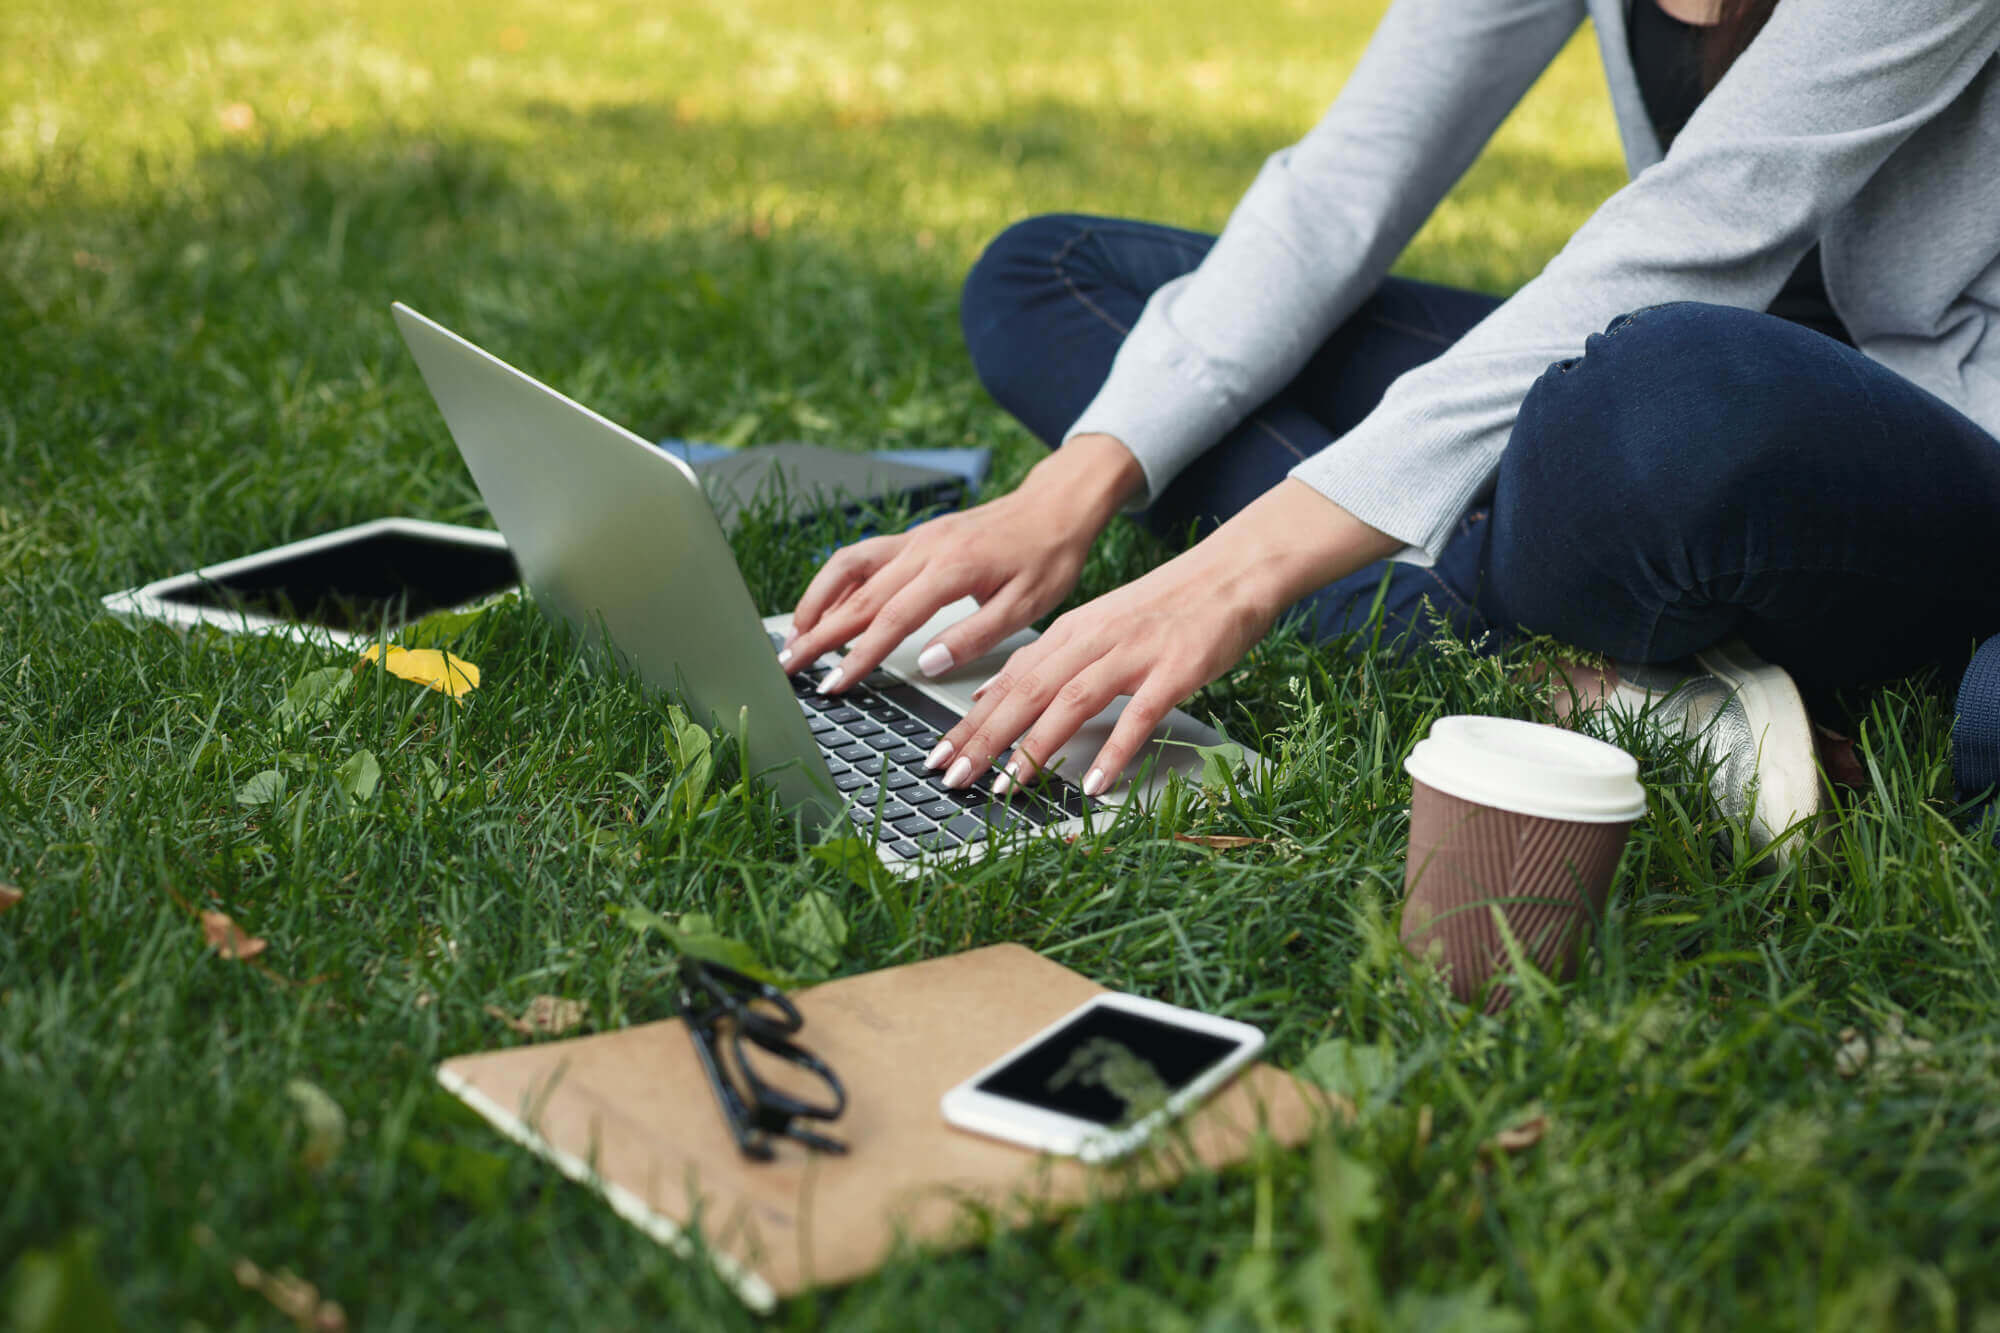 Woman sitting on grass using a silver laptop